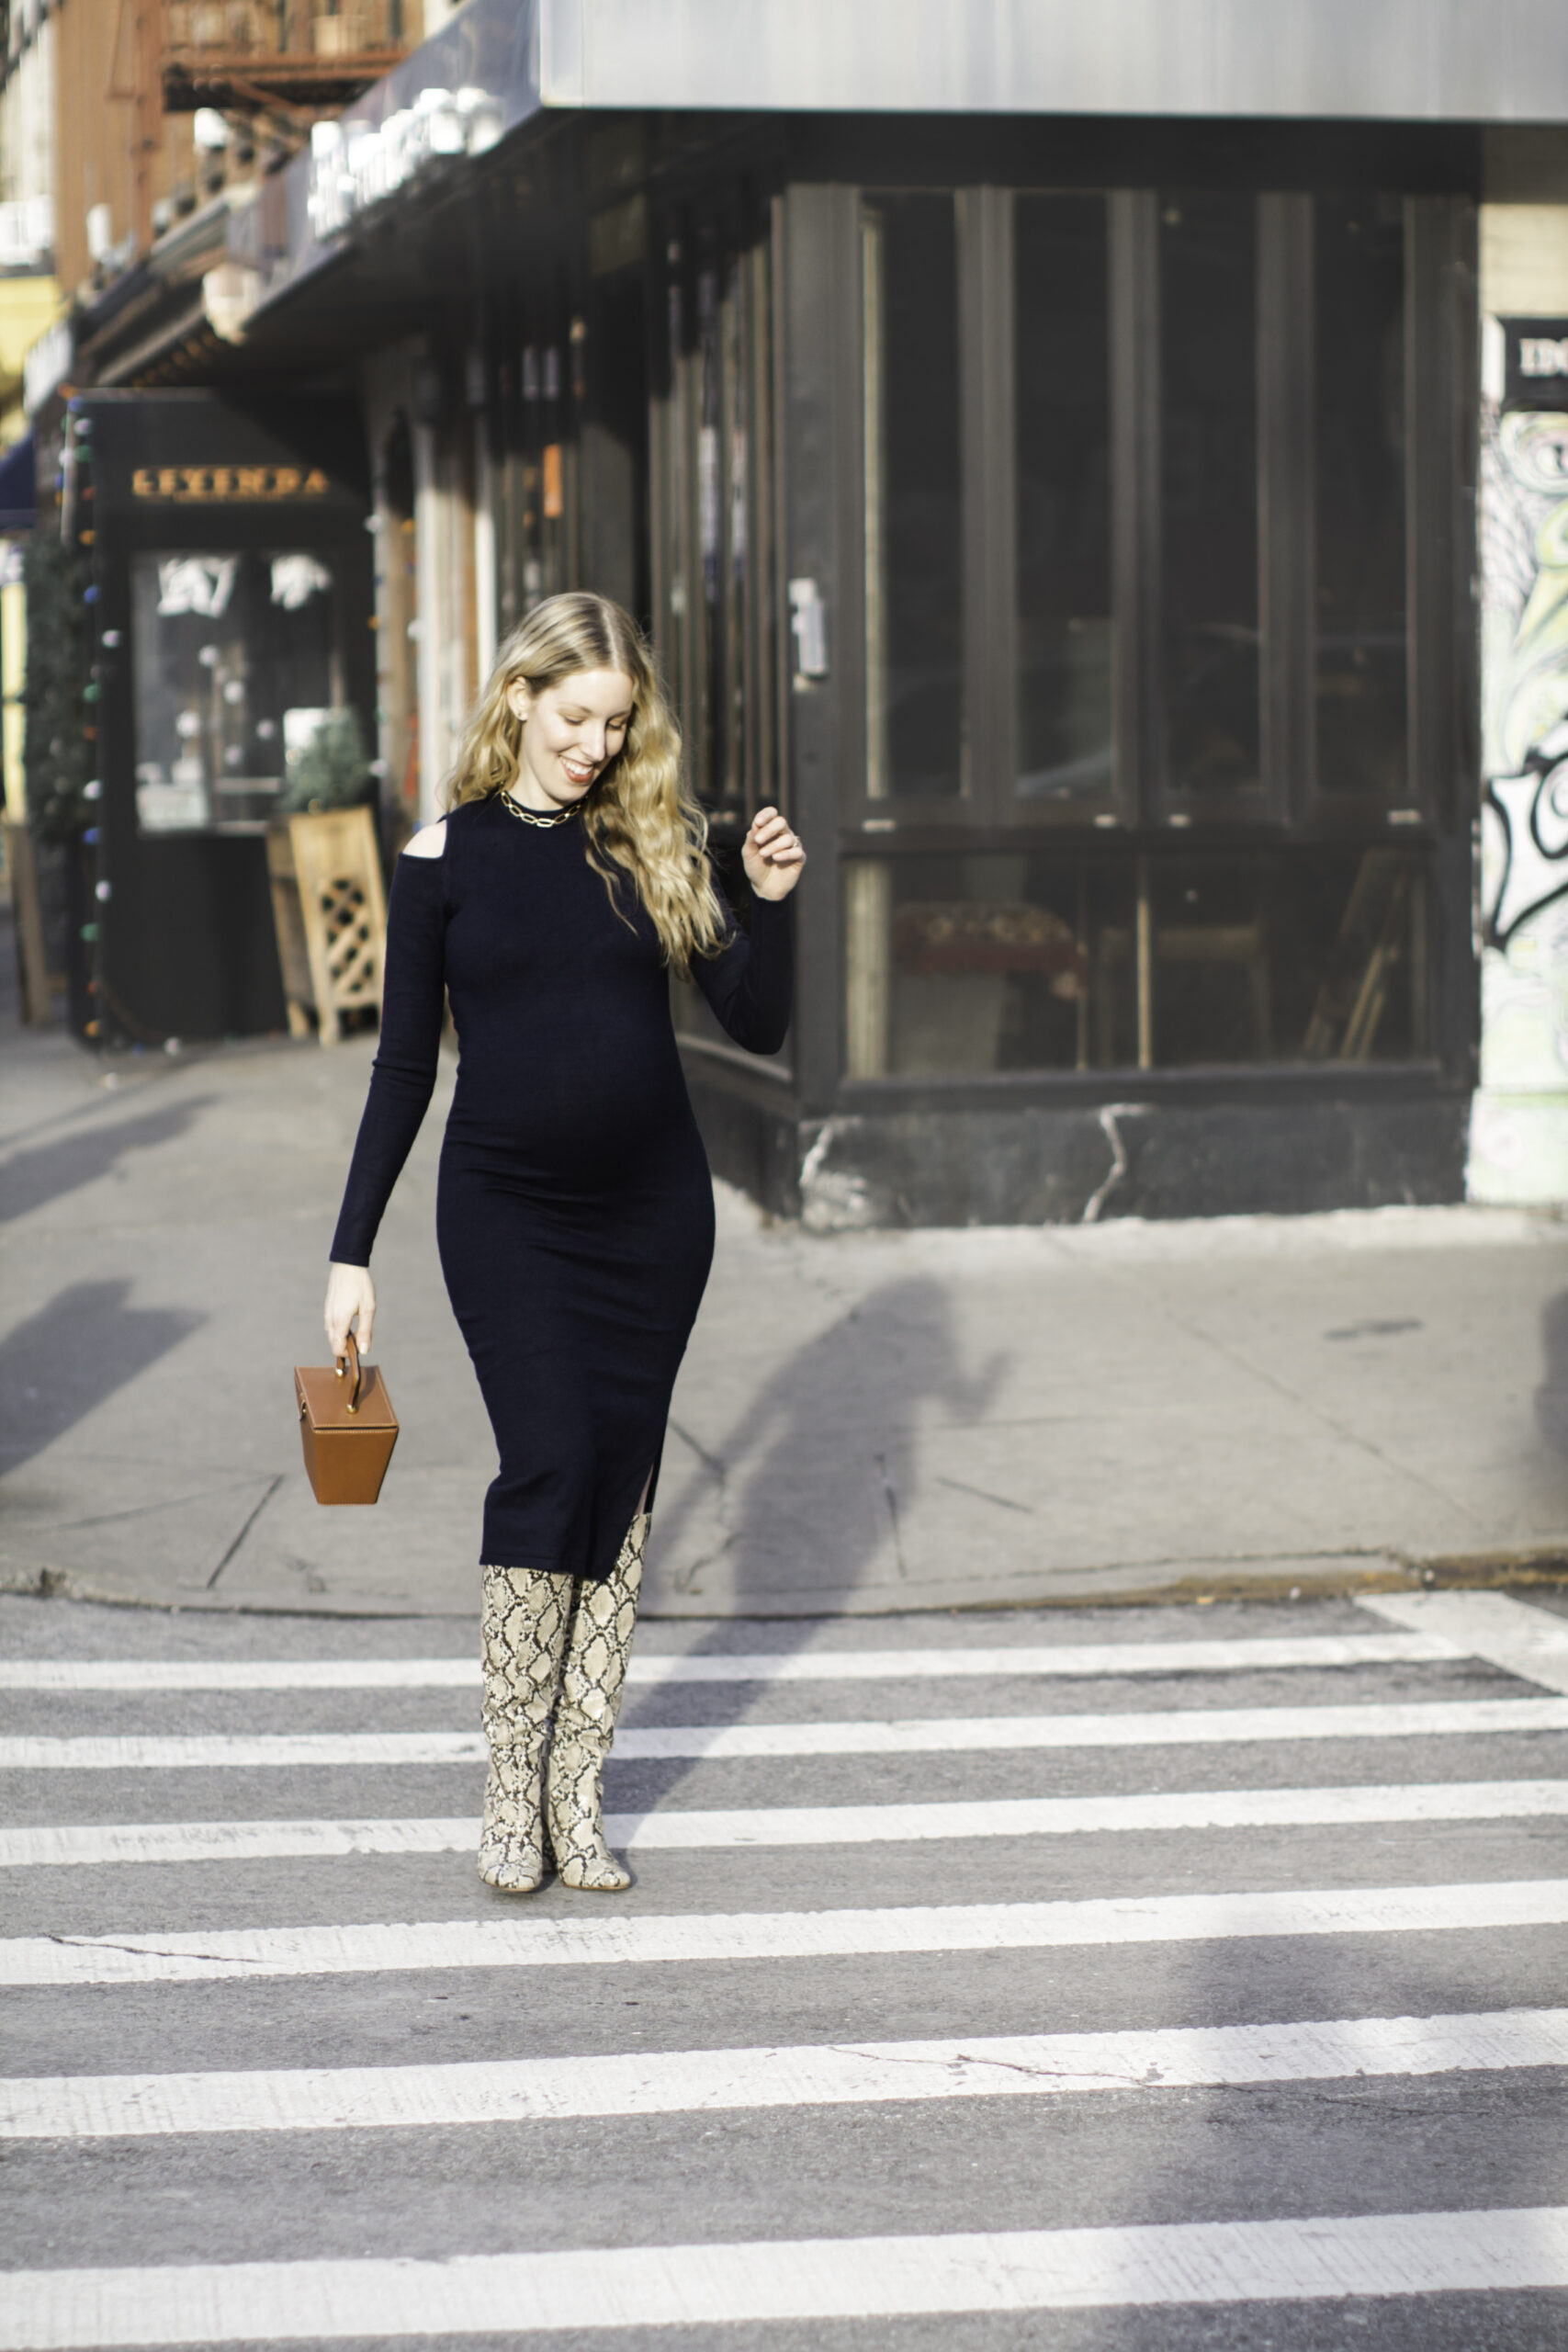 The Best Maternity Clothes of 2020